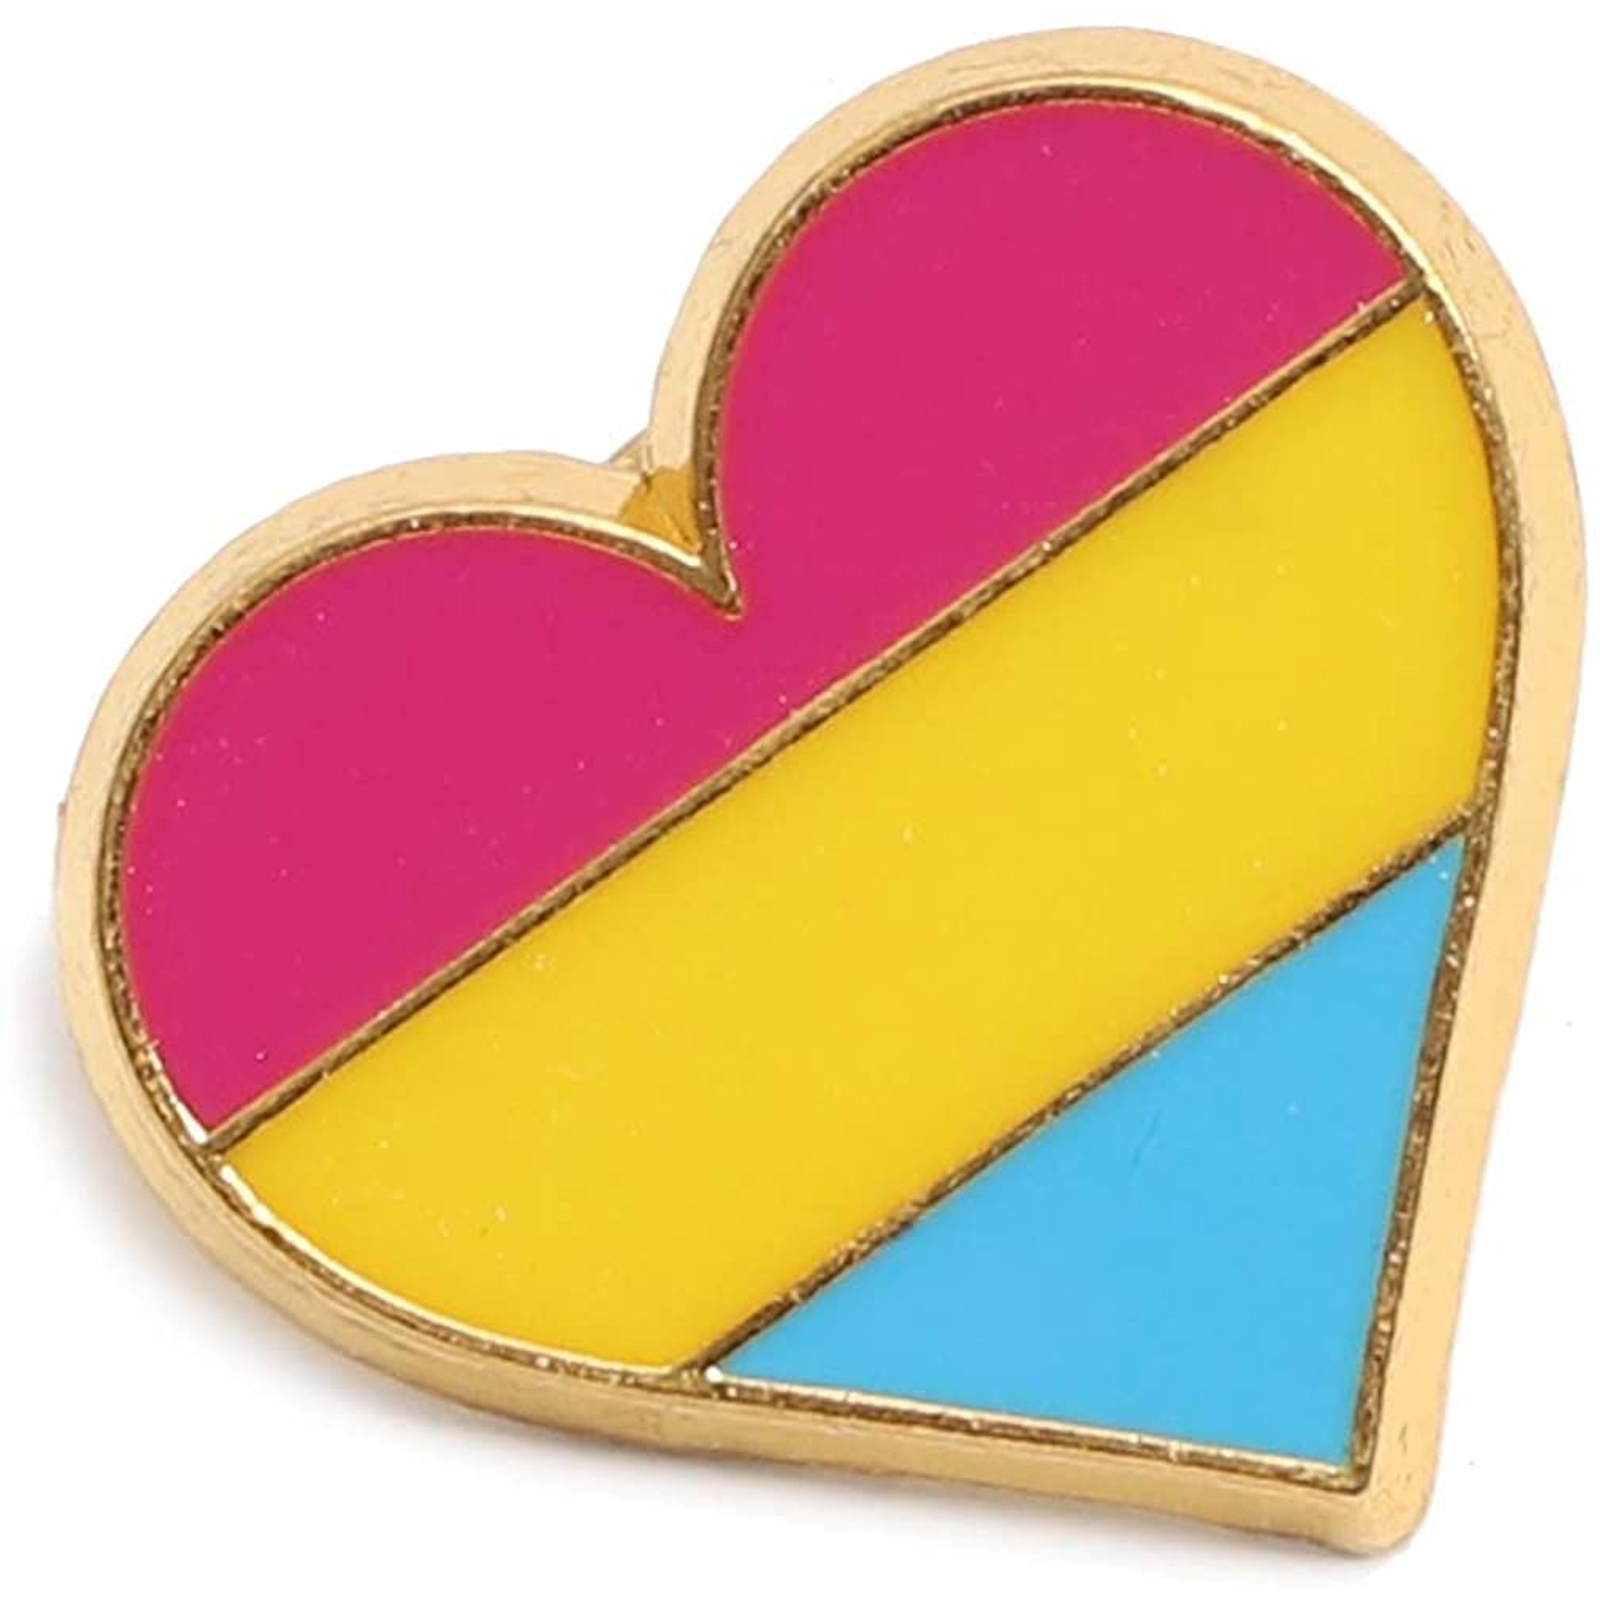 Pack Pansexual Pride Accessories LGBTQ Enamel Pins, 0.9 x 0.8 inches Pink Blue White Striped Hearts Flag Support Pride Lapel Pin Badge for Men and Women, Lesbian, Gay, Bisexual, Transgender, Queer